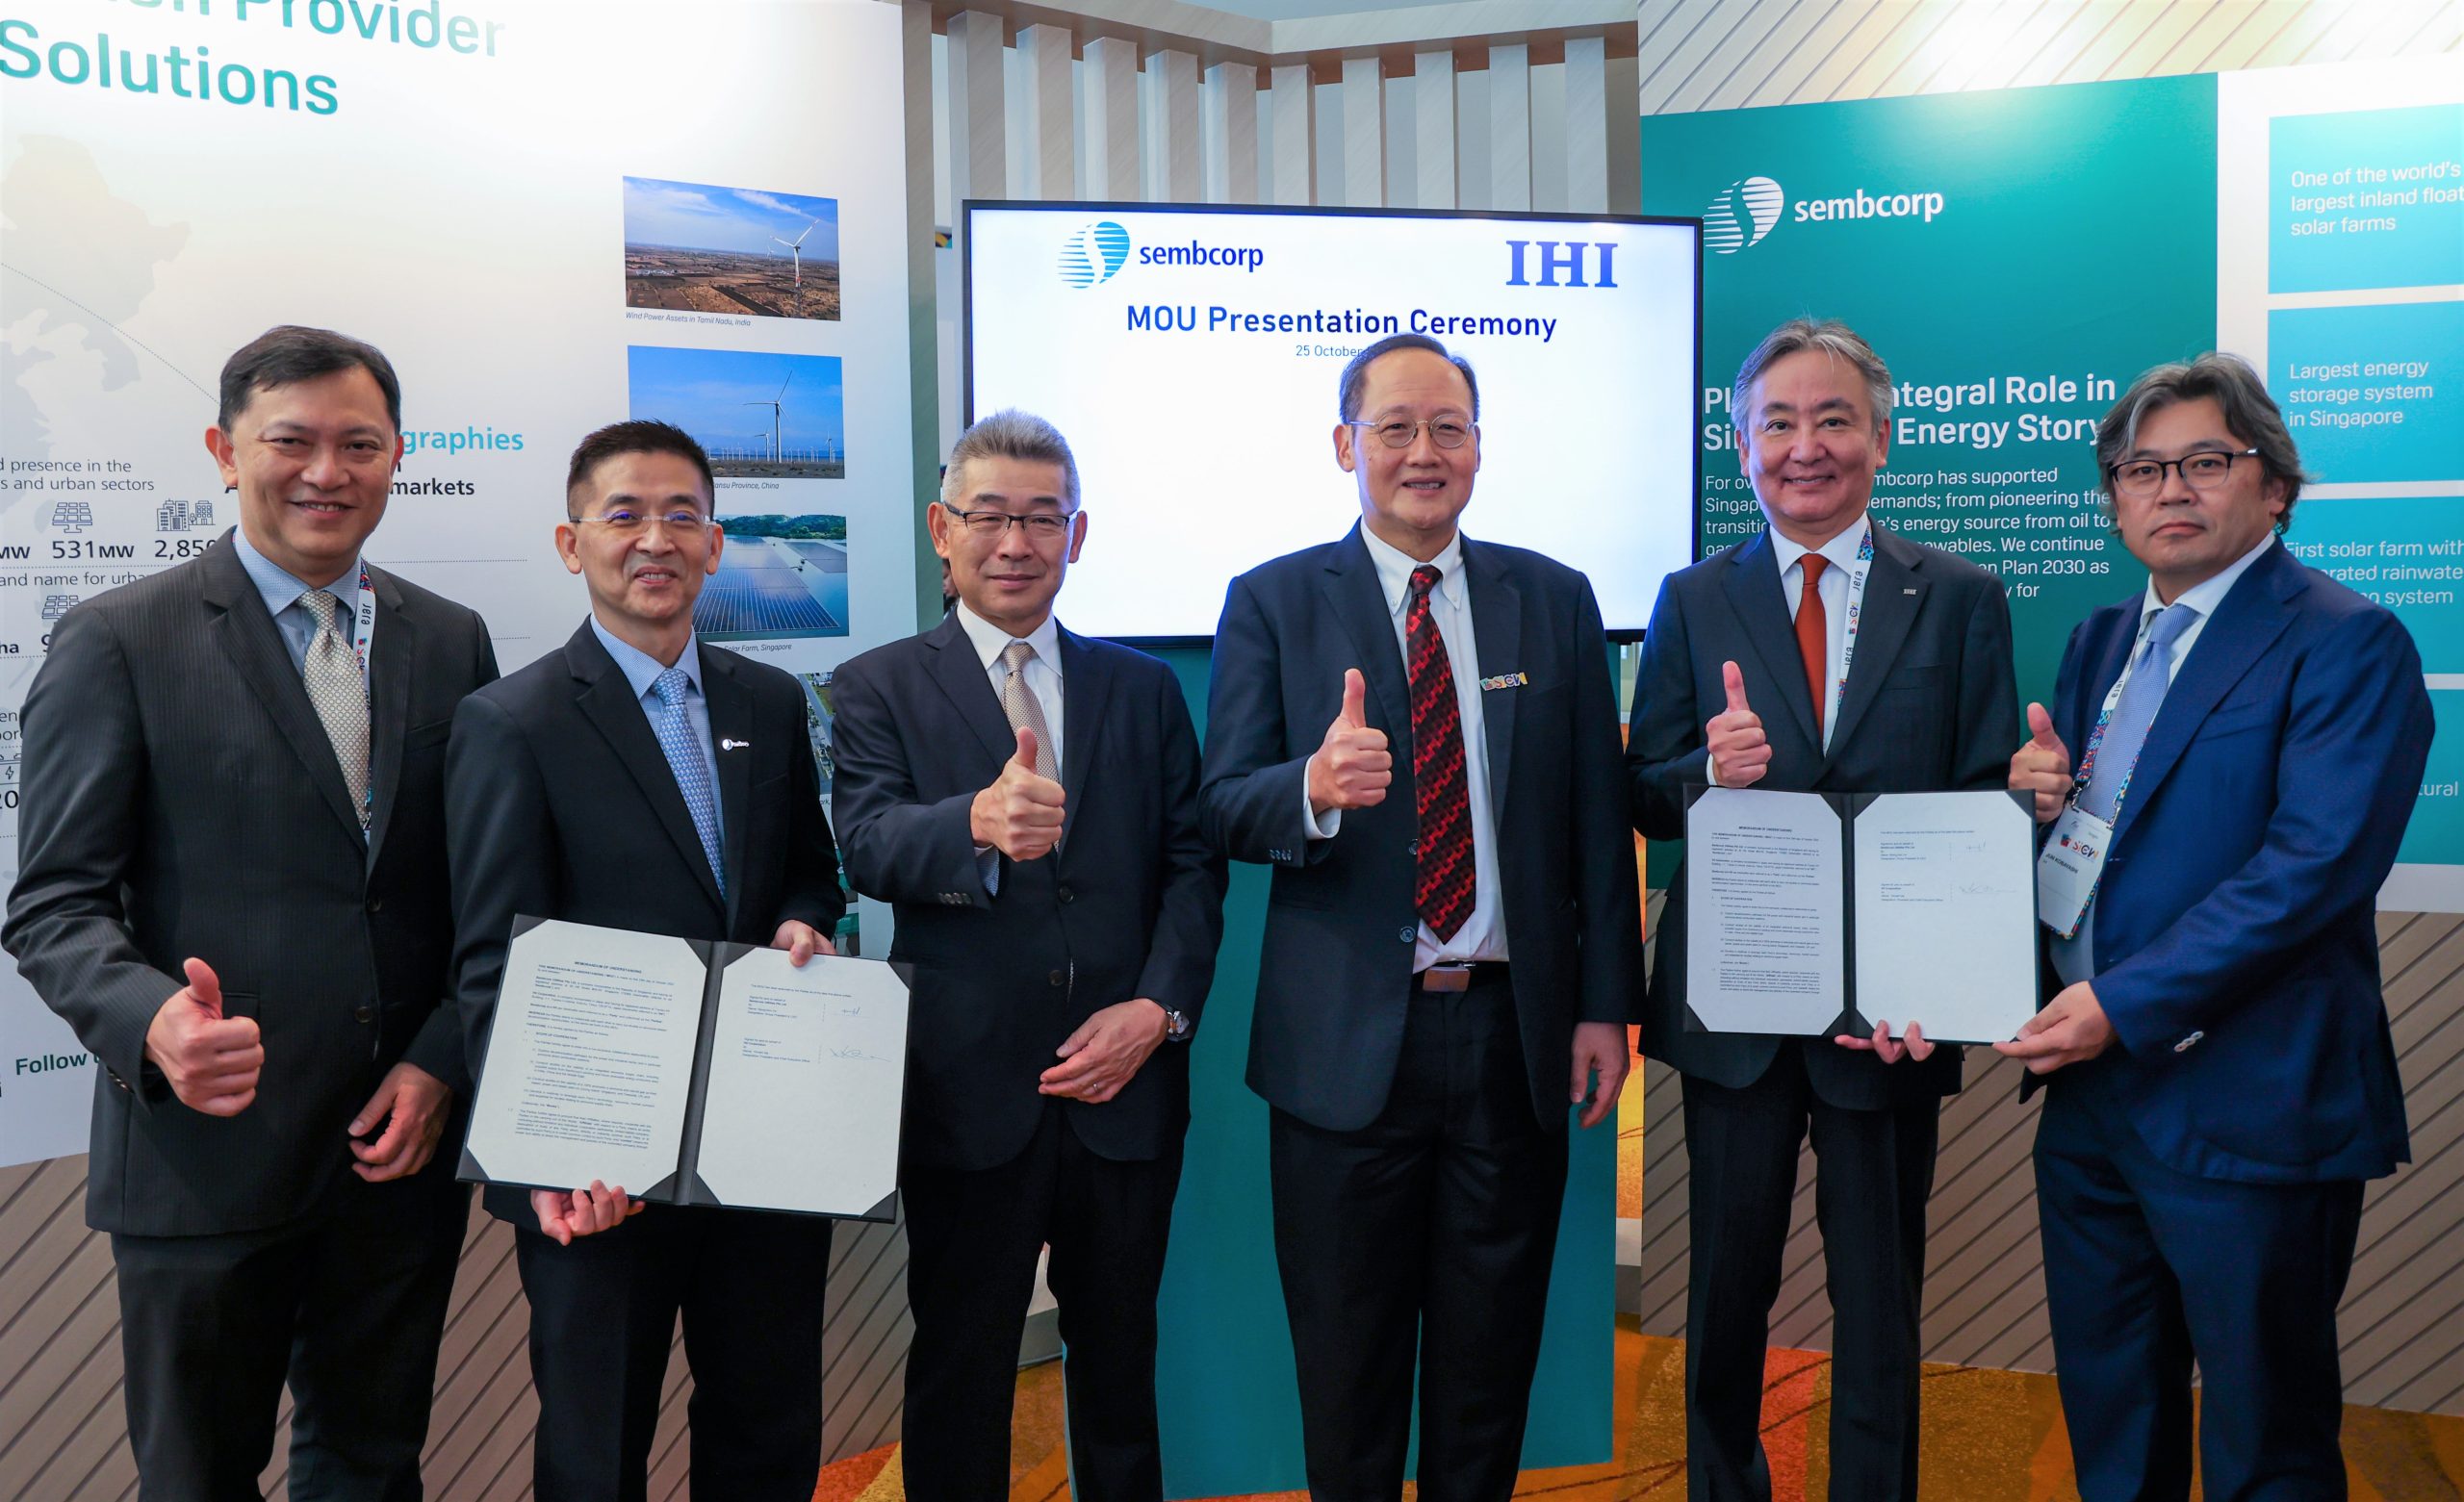 IHI signed with Sembcorp to jointly collaborate in developing the Ammonia Supply Chain in Singapore and Asia Pacific